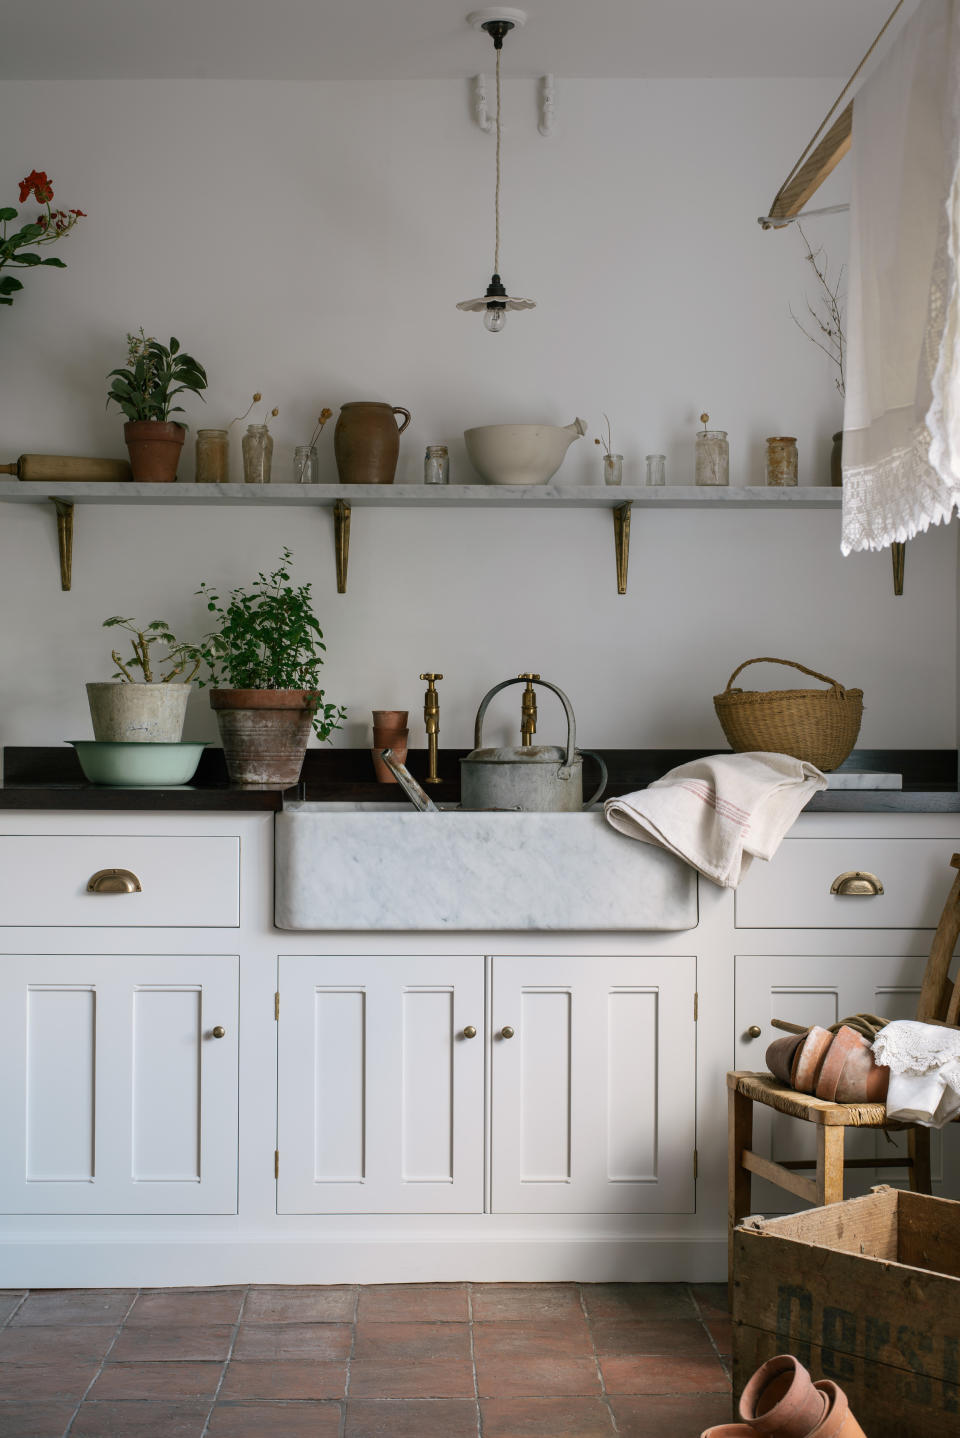 <p> 'The mudroom should include a good-sized Belfast sink (if space permits),' says Emma Sims Hilditch. </p> <p> We agree. Mudrooms will be useful for cleaning not just boots and clothes, but probably the odd pet and toddler, too. Include a tap with a shower fitting for the ultimate in practicality. </p>